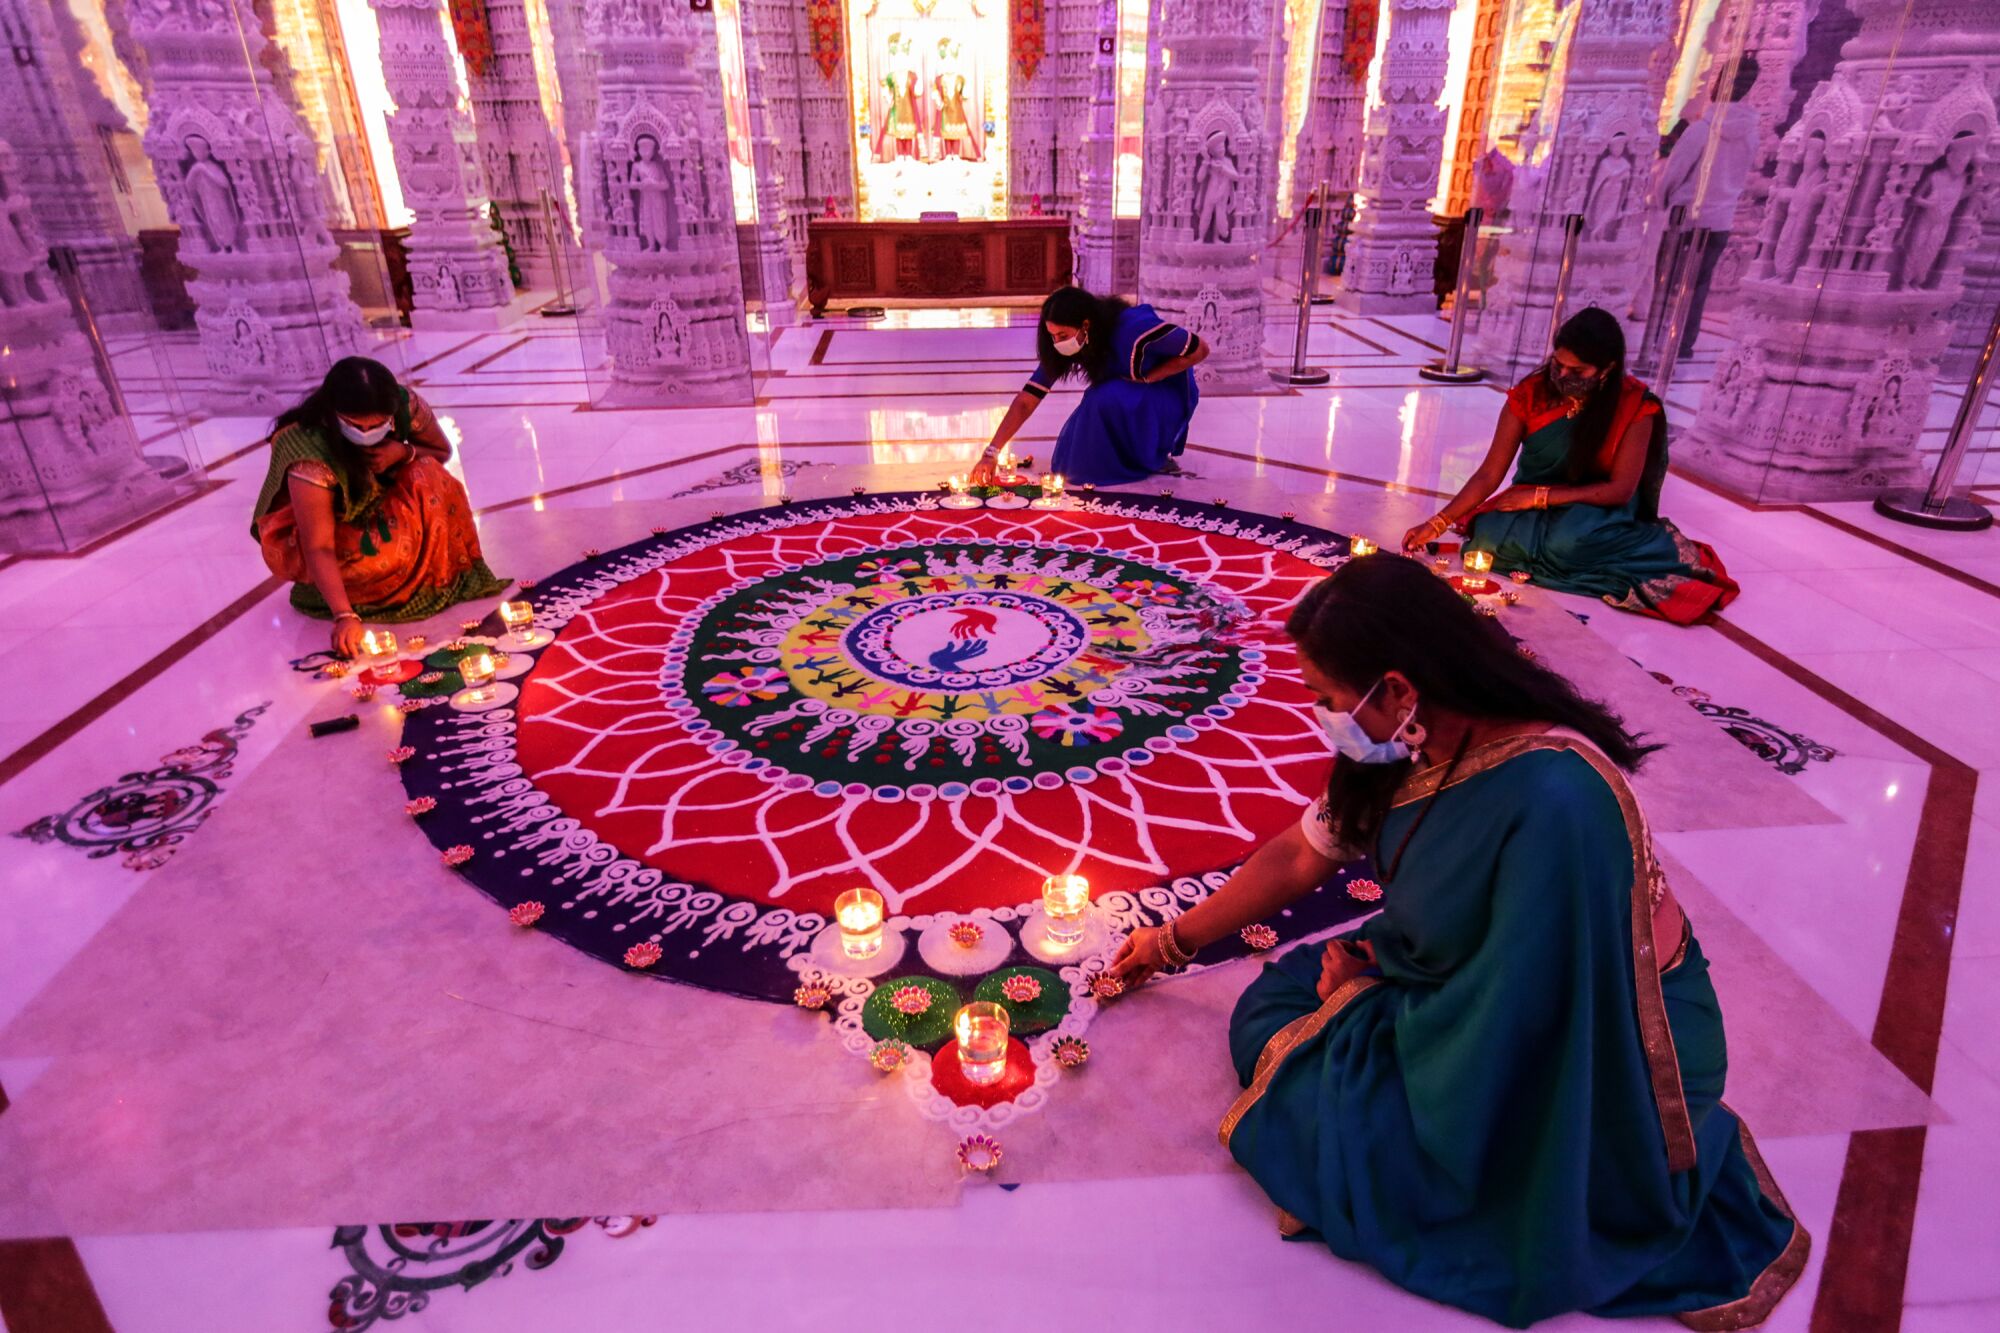 Women in traditional robes kneel around an intricate work of sand art inside a Hindu temple